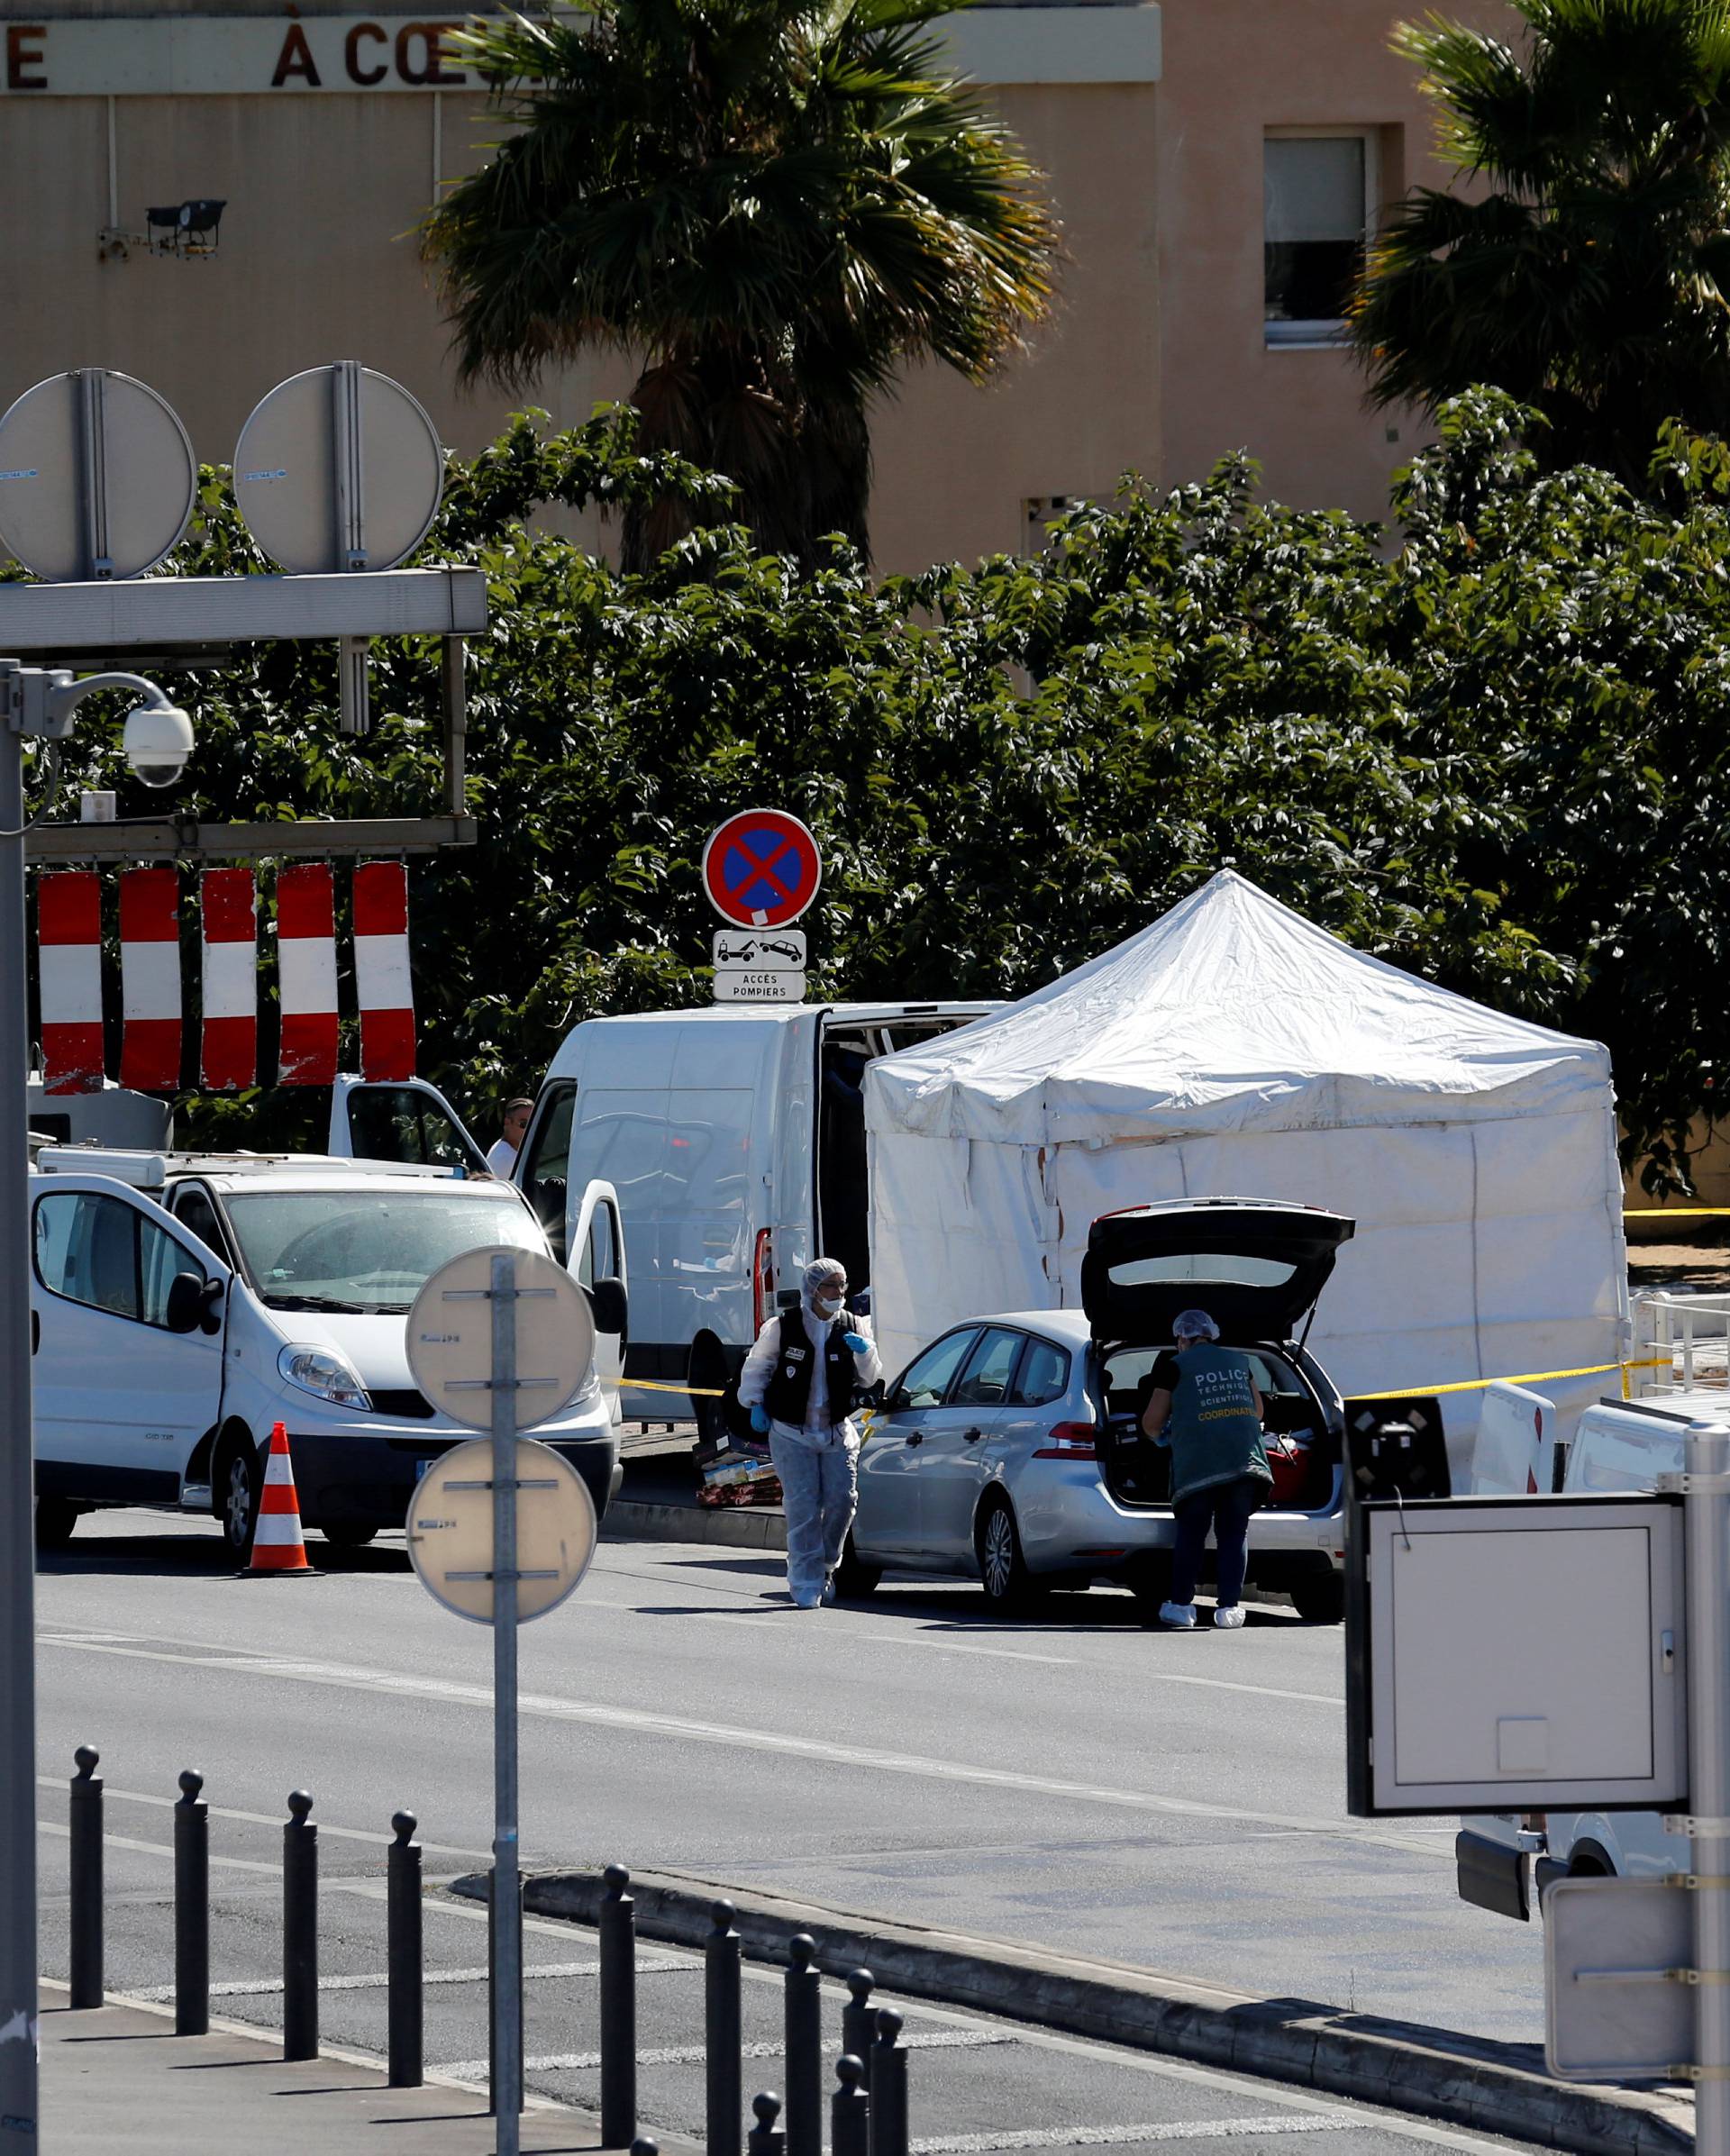 French police conduct their investigatation in the French port city of Marseille after one person was killed and another injured after a vehicle crashed into two bus shelters